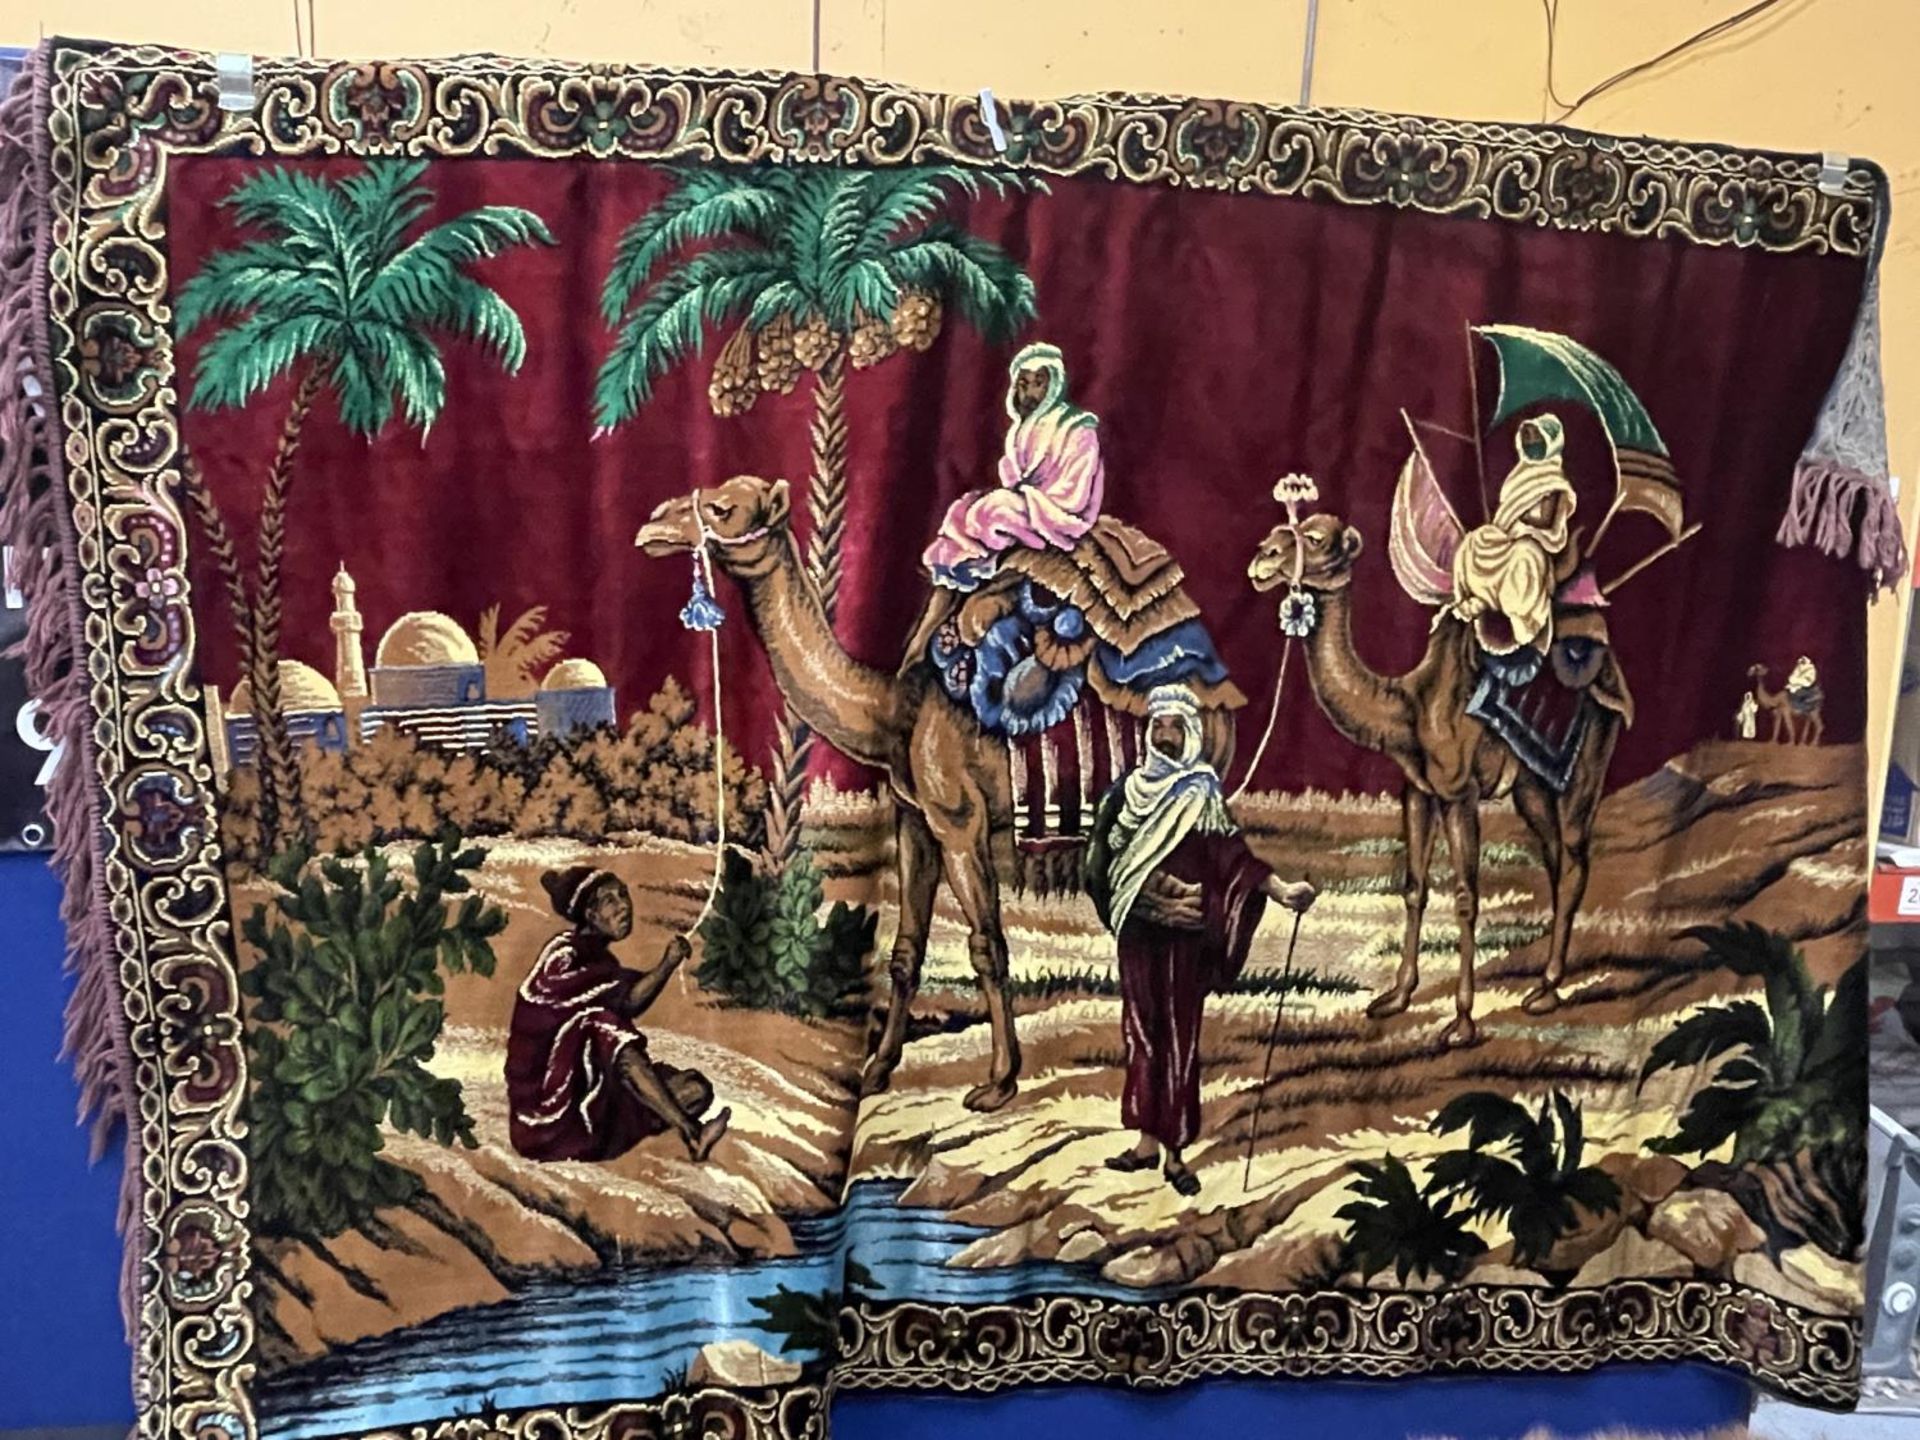 A LARGE HANDWOVEN ANTIQUE WALL TAPESTRY RUG/THROW OF AN ARABIAN SCENE 72" X 46" - Image 2 of 10